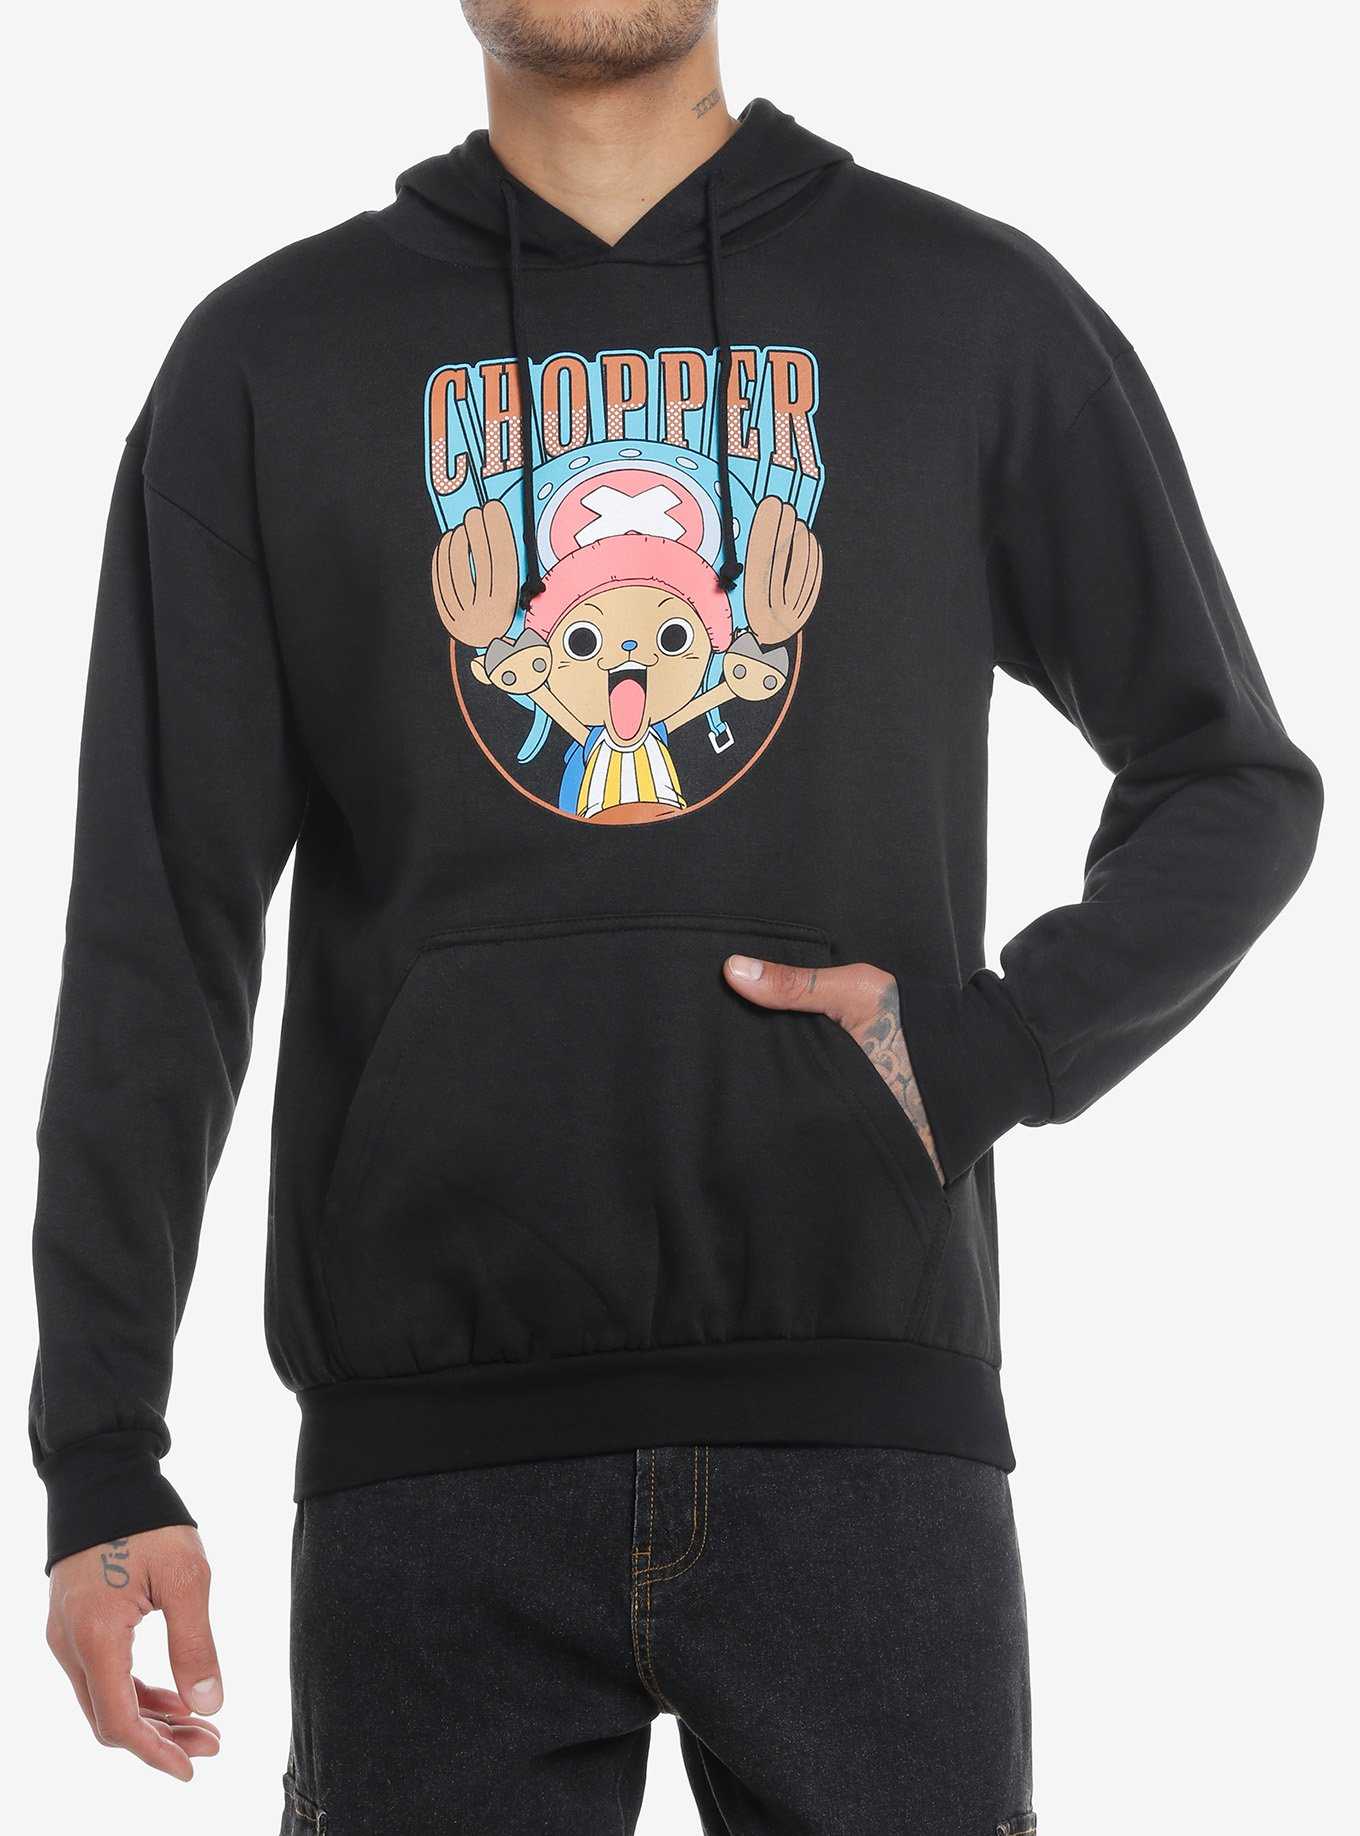 One Piece Going Merry Live Action Hoodie